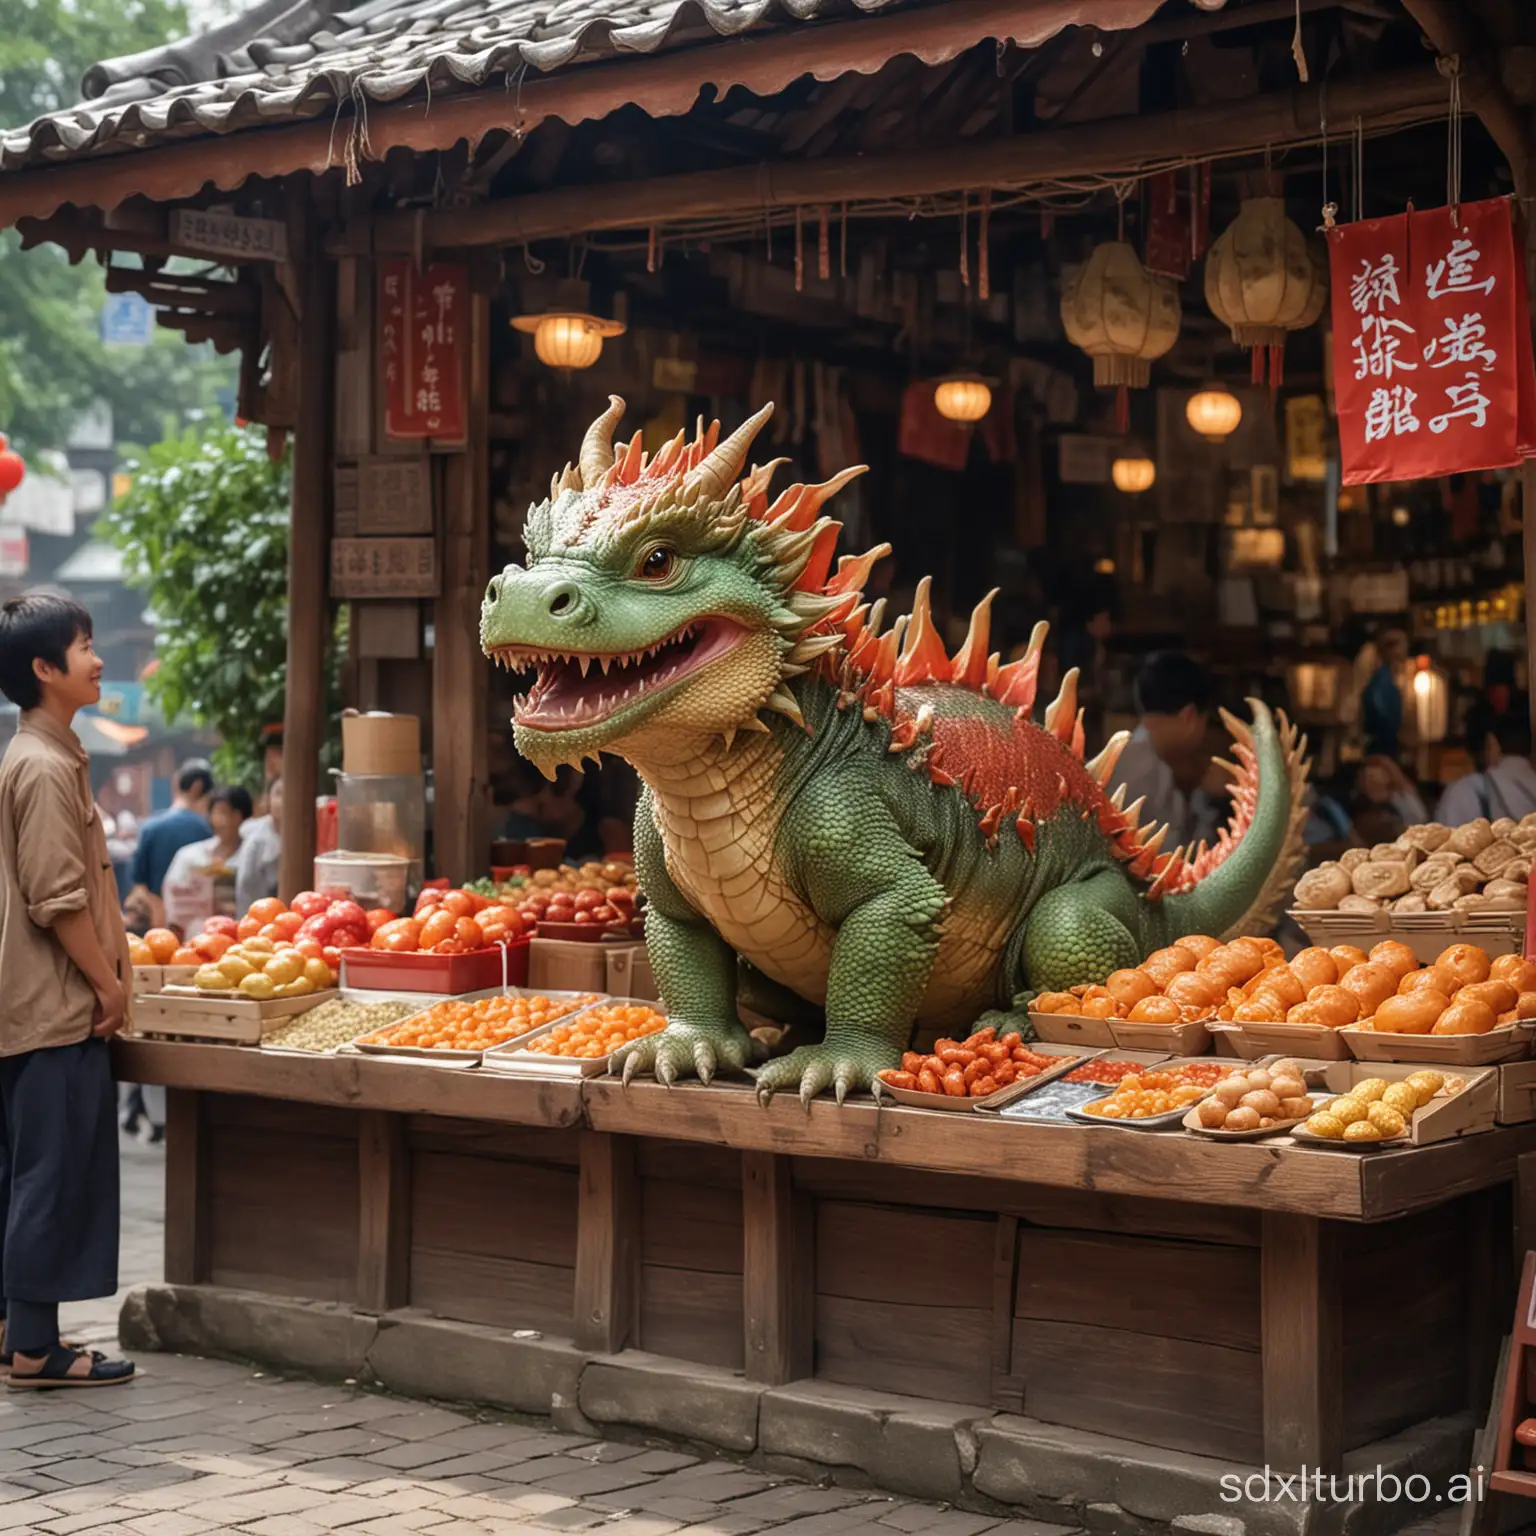 The little dragon is an animal with short wings, chubby and cute and charmingSuccessful Transitions:

Scene: In front of Xiaolong's stall, a long line of customers waiting. He was busy making good food, sweat dripping from his forehead.

Emotion: A successful smile on the face, pride and satisfaction in the eyes.